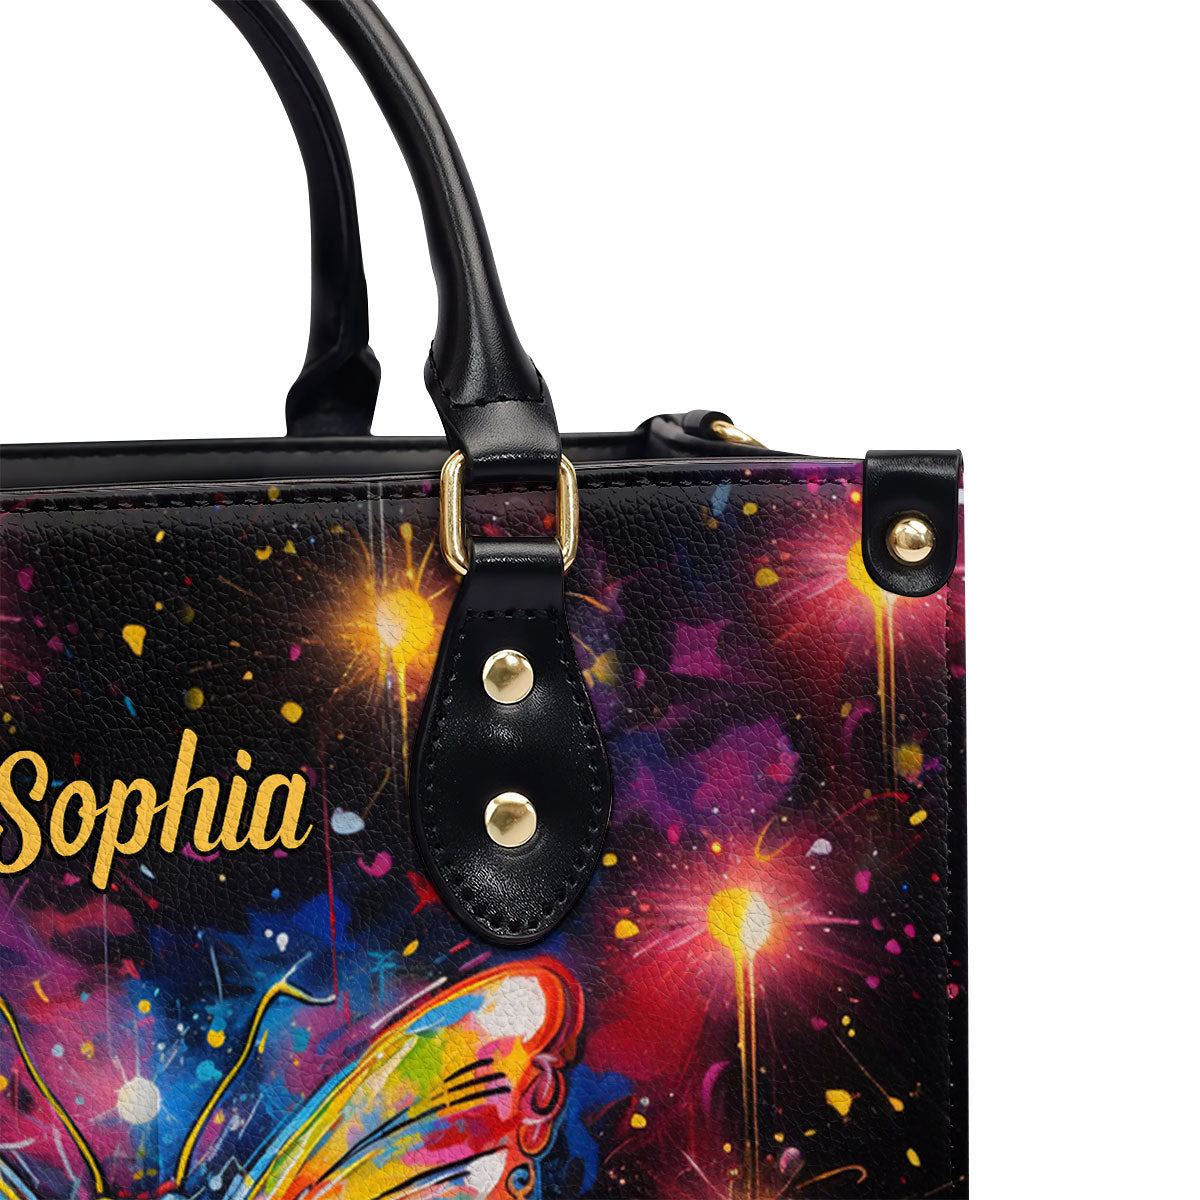 Colorful Butterfly - Personalized Leather Handbag MS-NH15